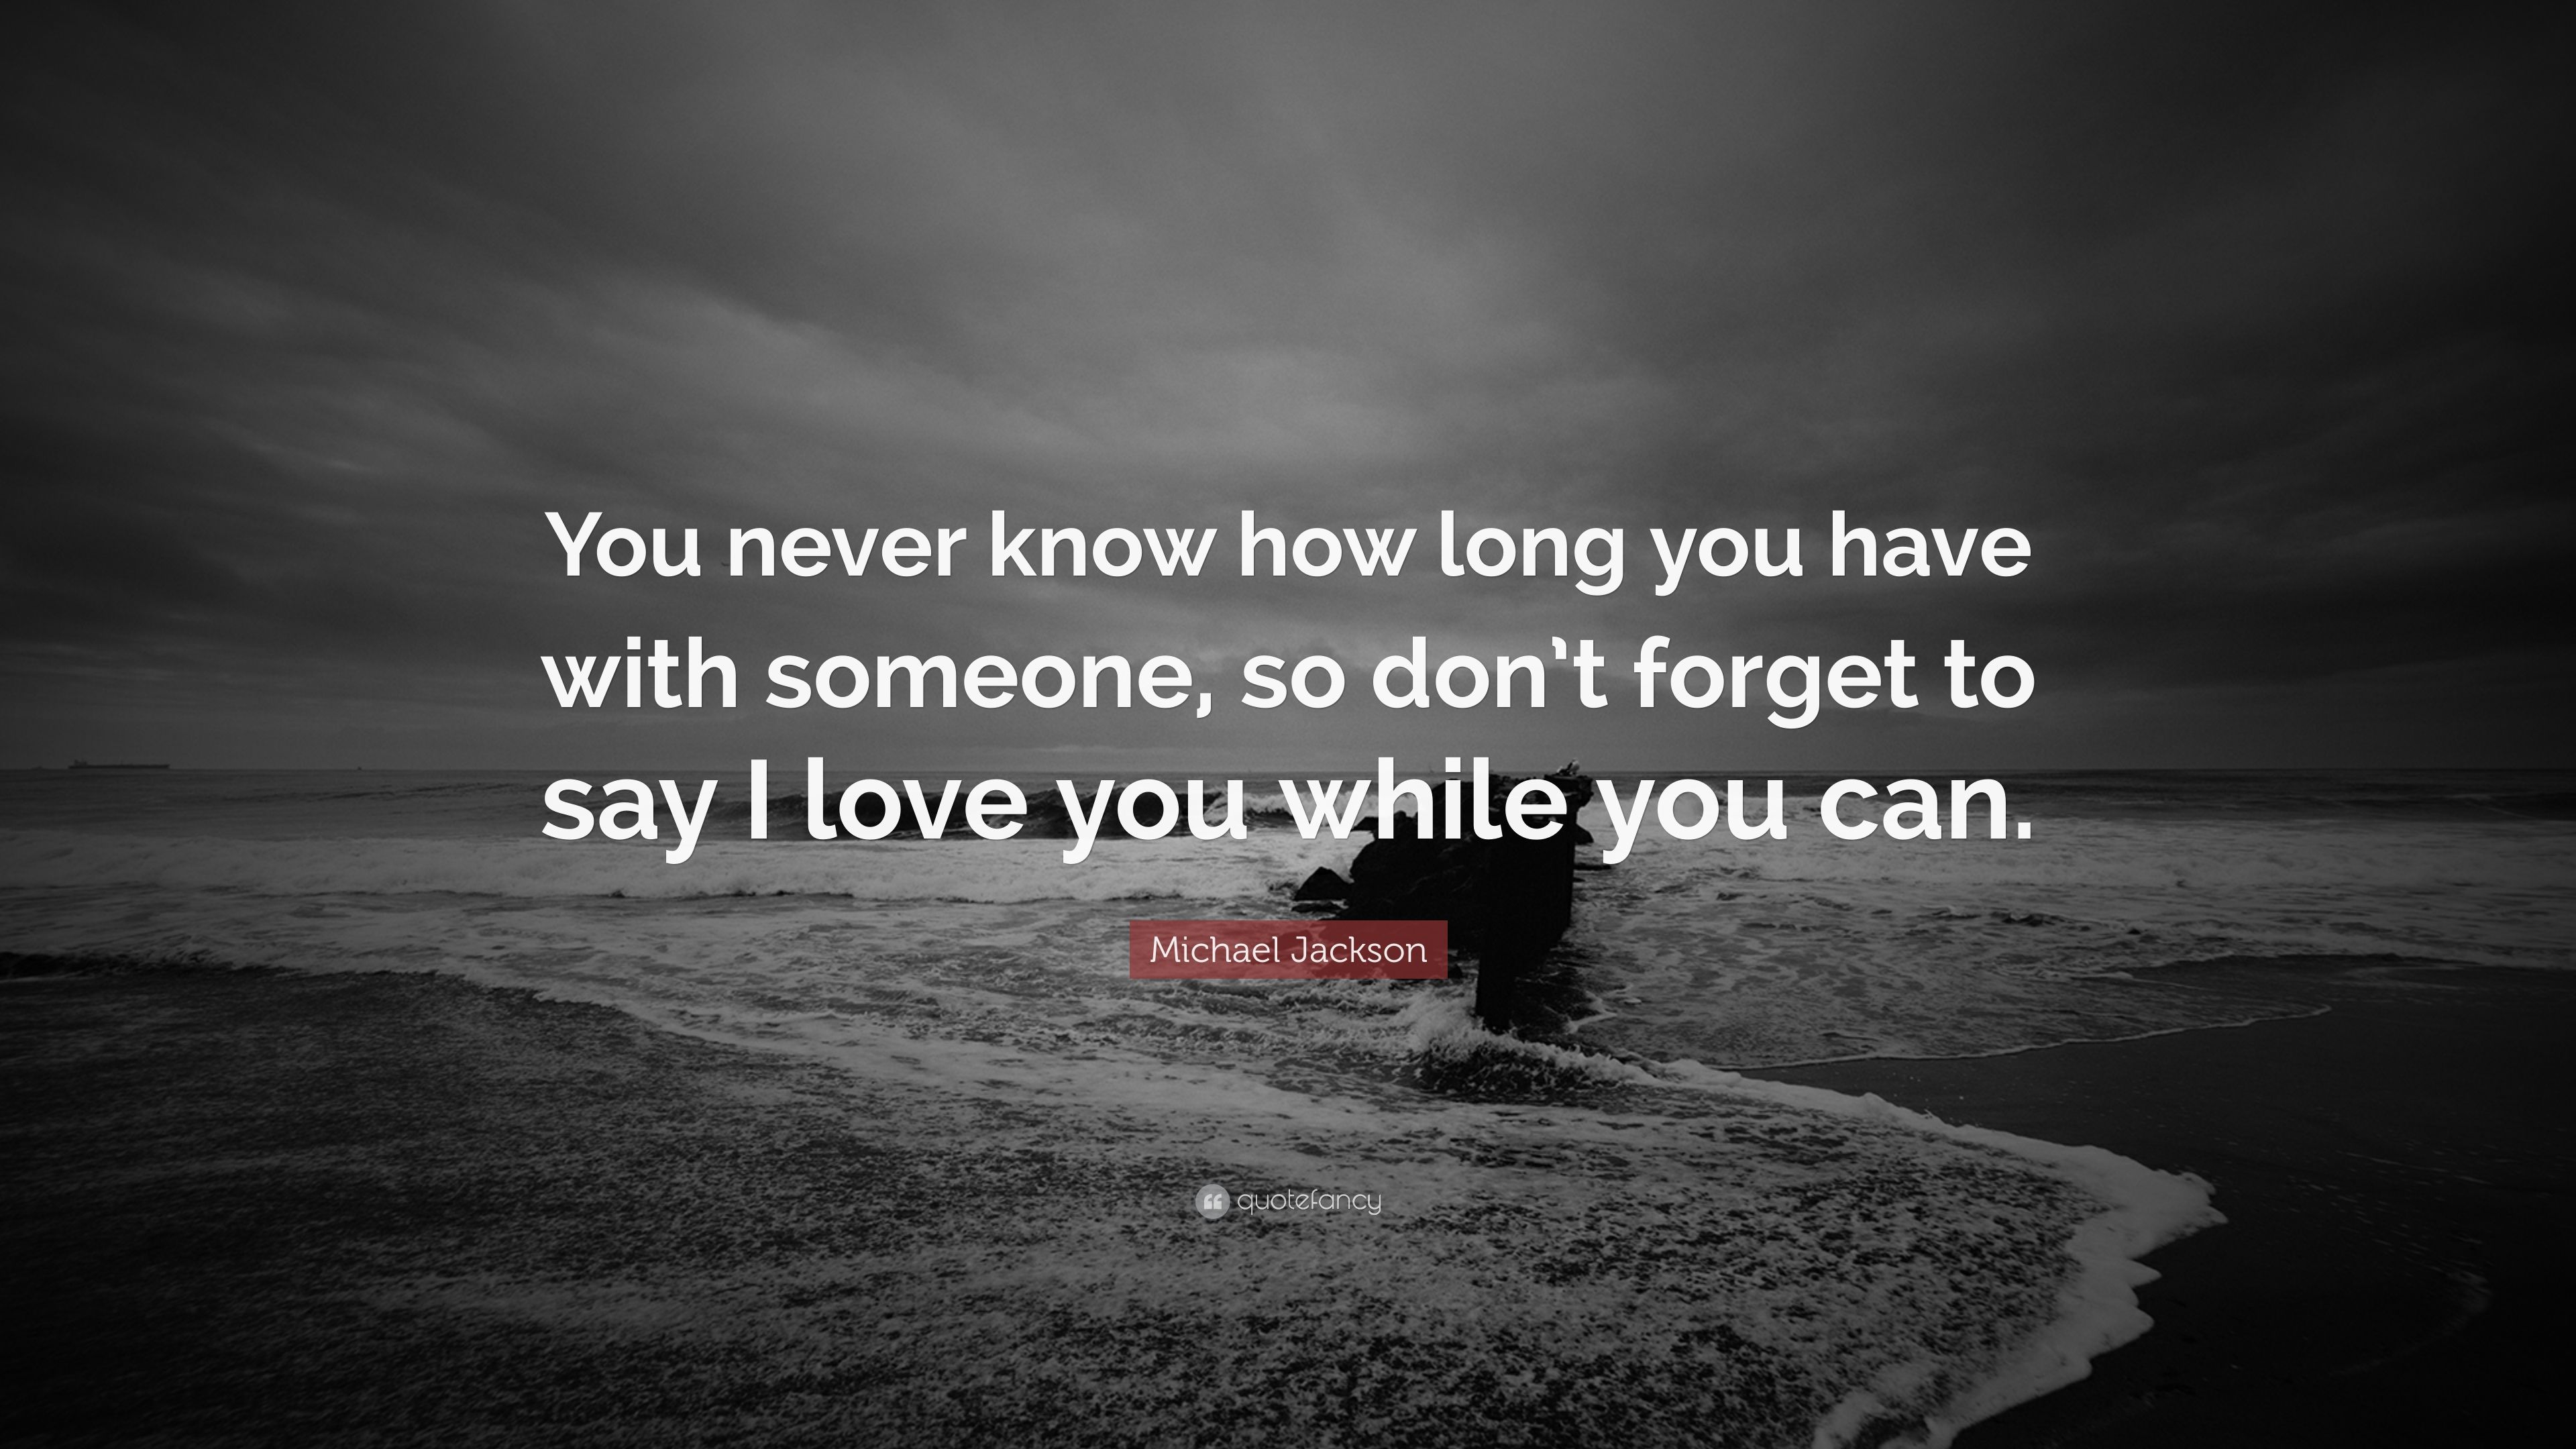 Michael Jackson Quote: “You never know how long you have